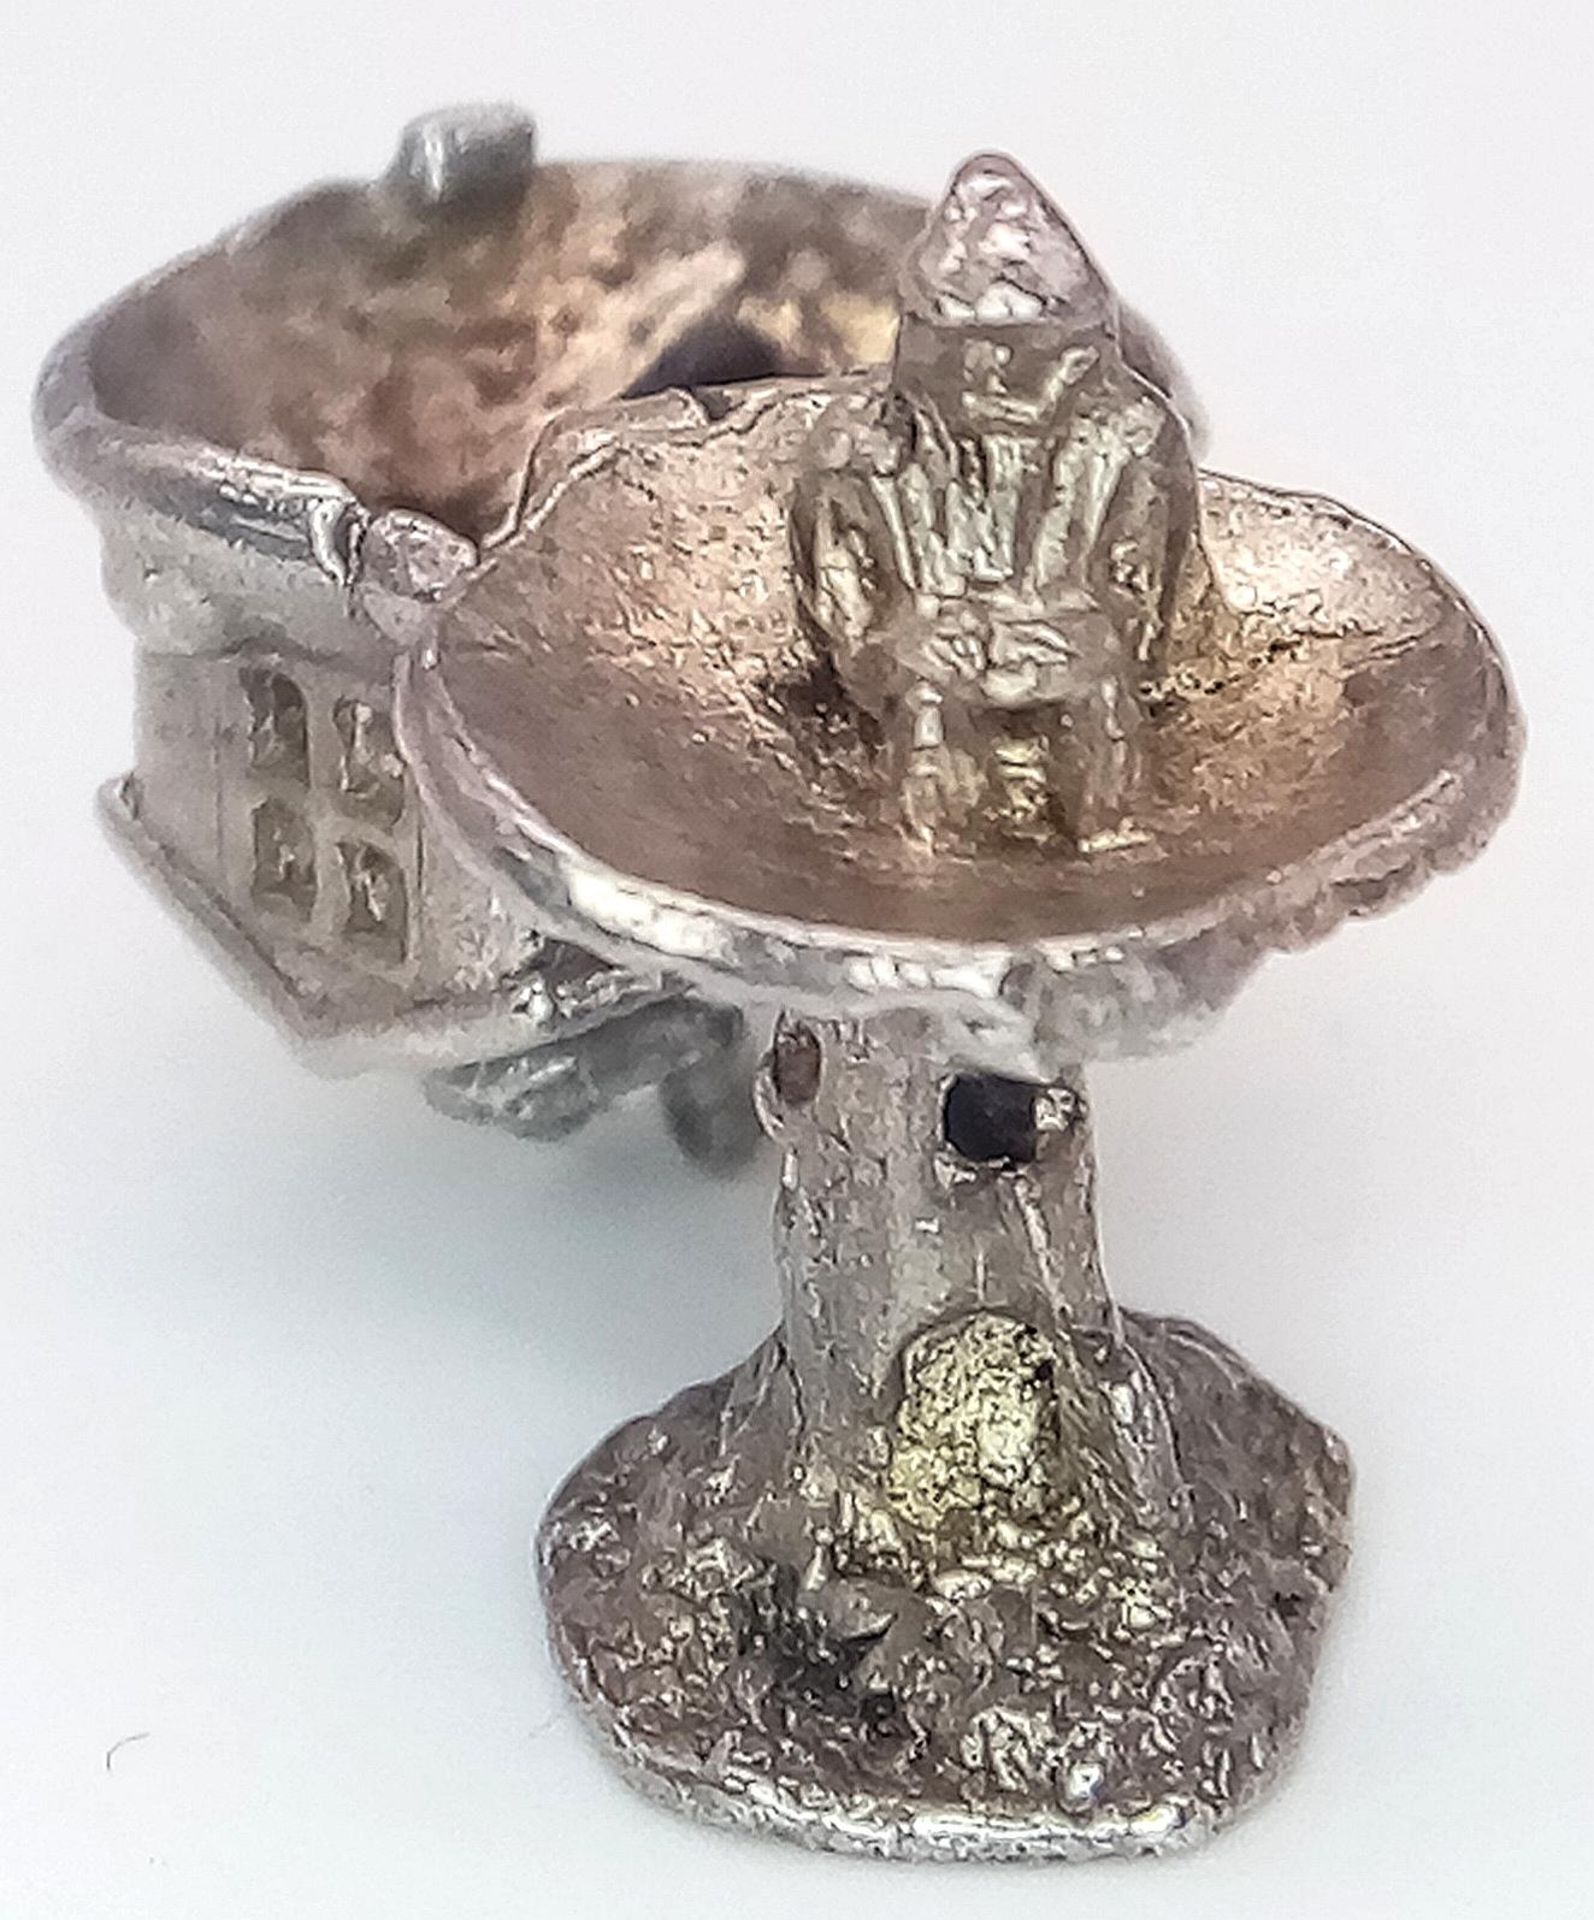 A VINTAGE STERLING SILVER TREE HOUSE CHARM, WHICH OPENS TO REVEAL A WIZARD INSIDE, WEIGHT 4G - Image 2 of 4